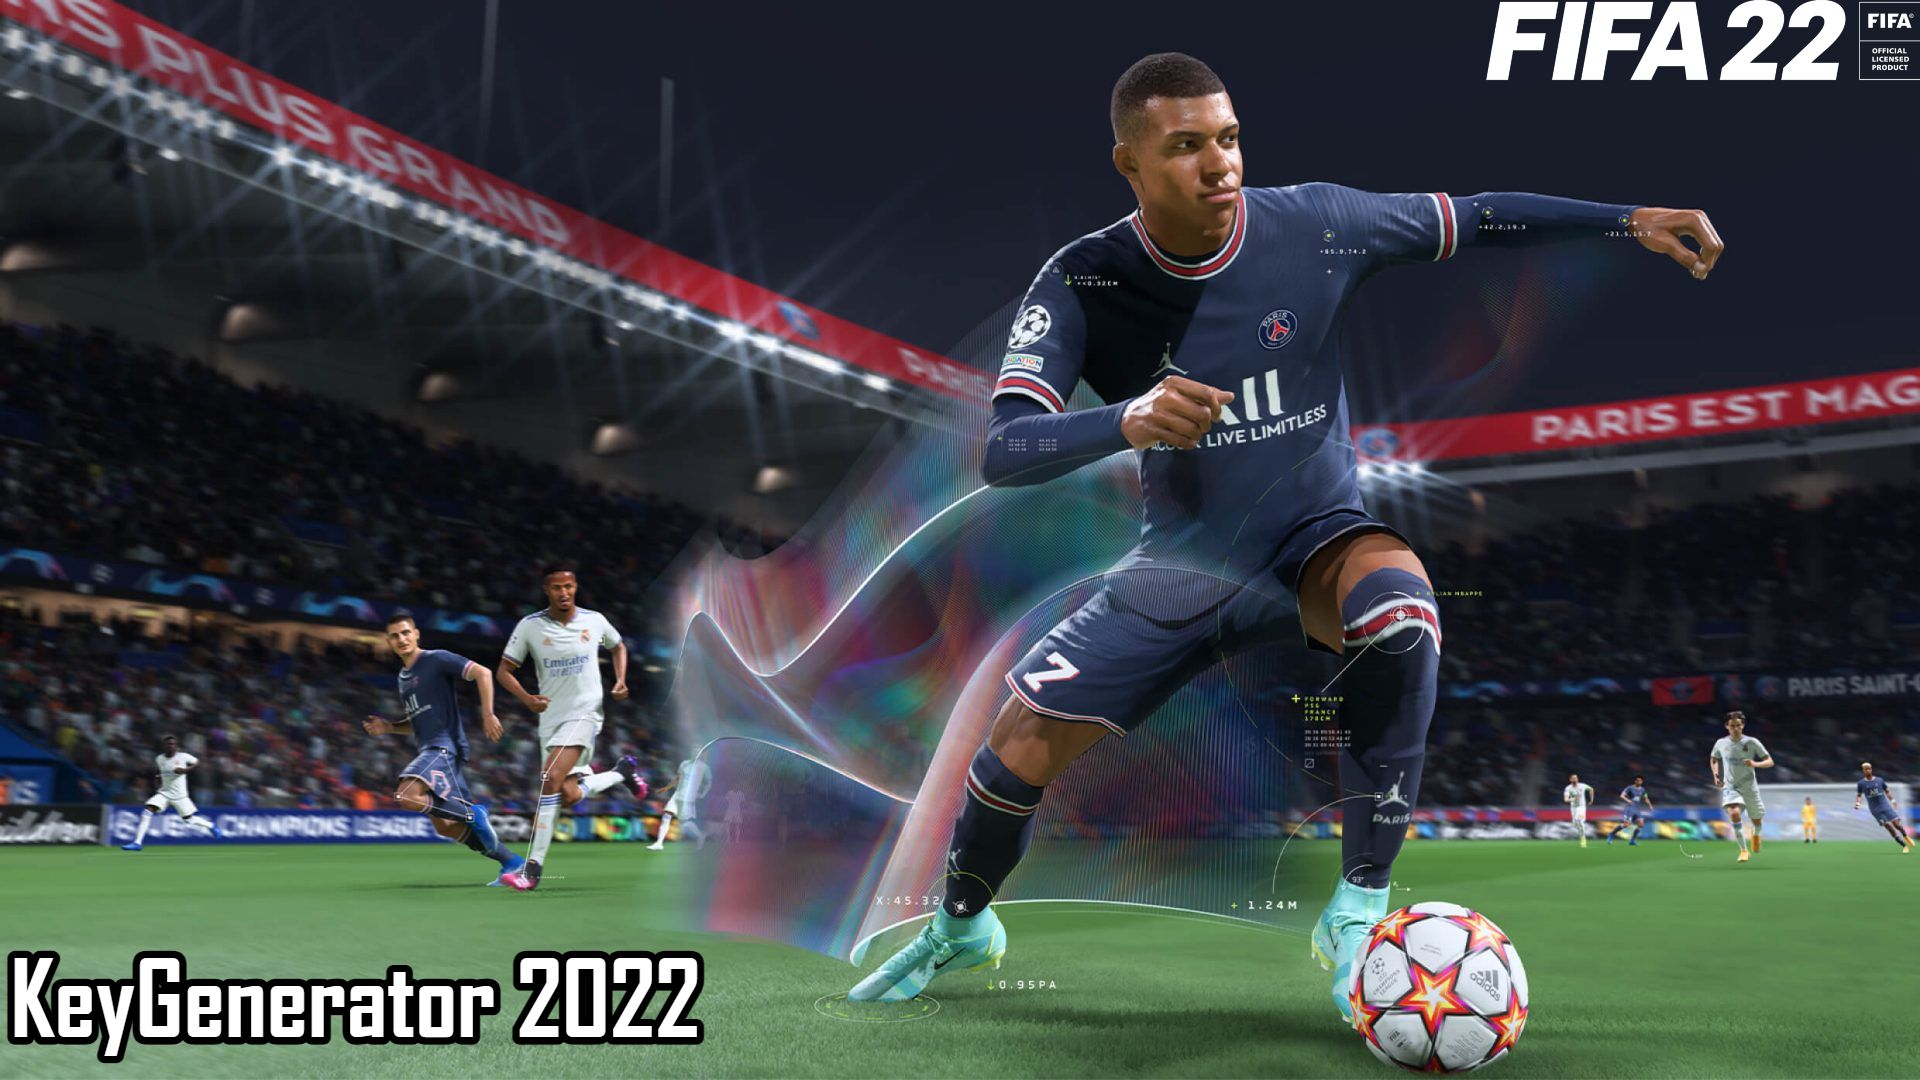 Read more about the article FIFA 22 KeyGenerator 2022